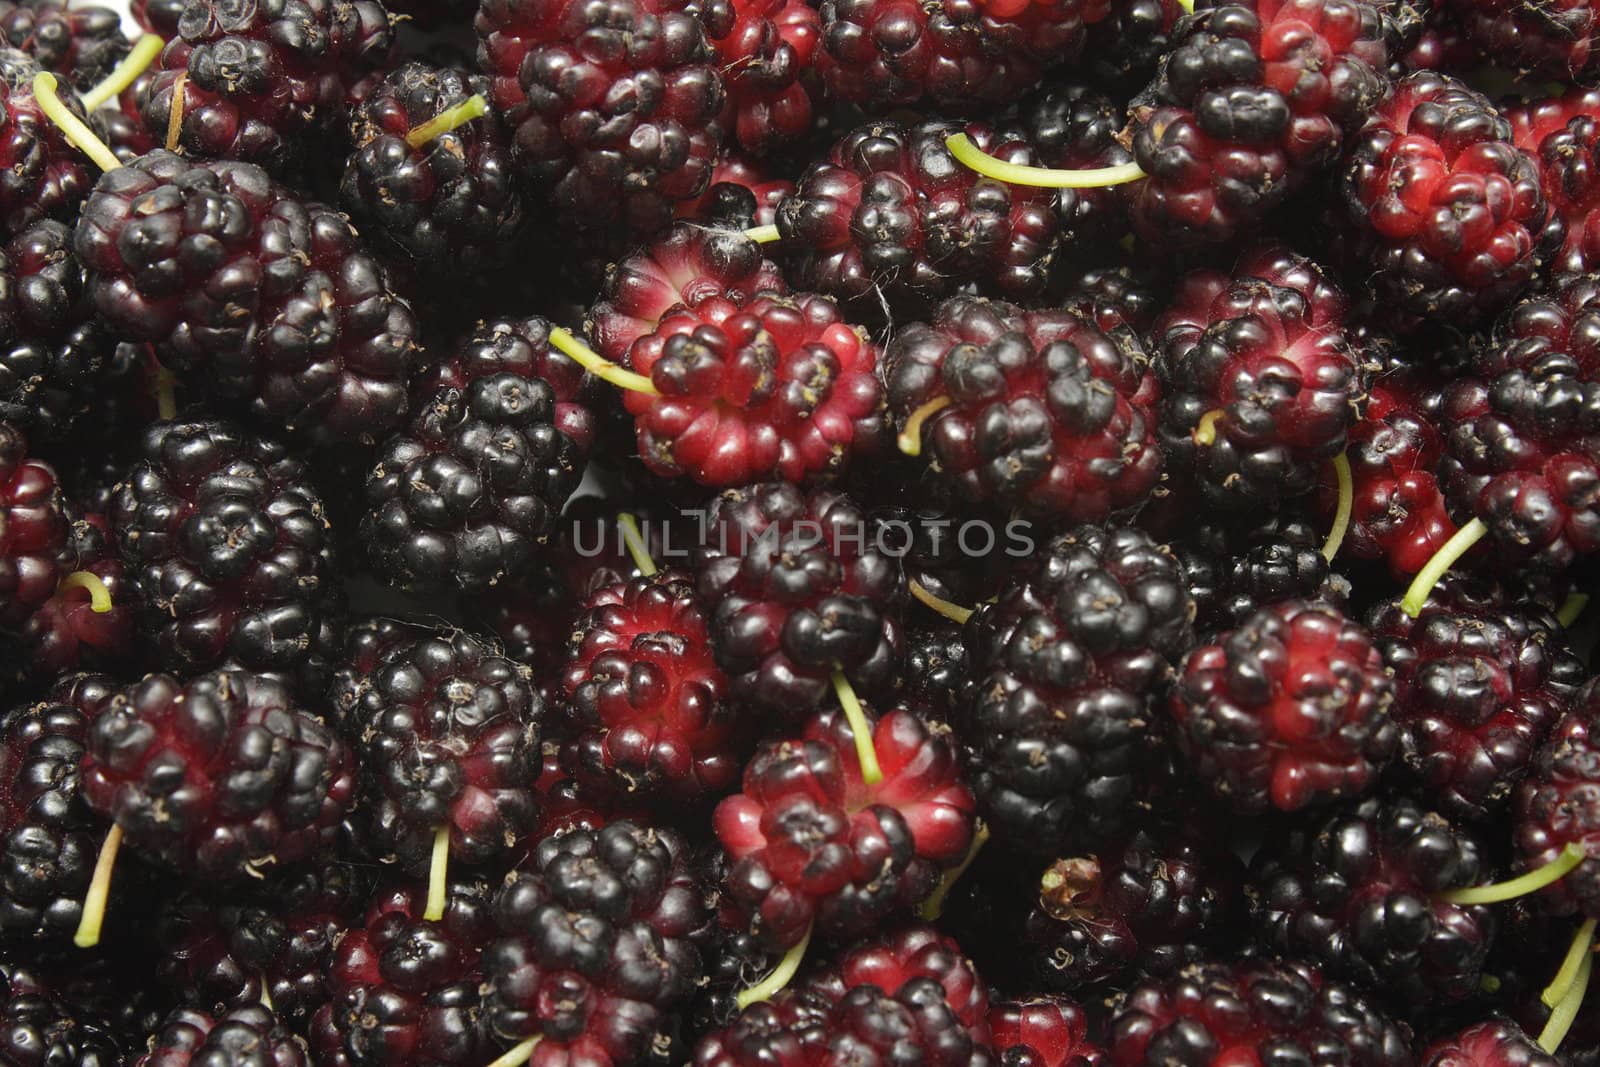 Ripe mulberries by pulen